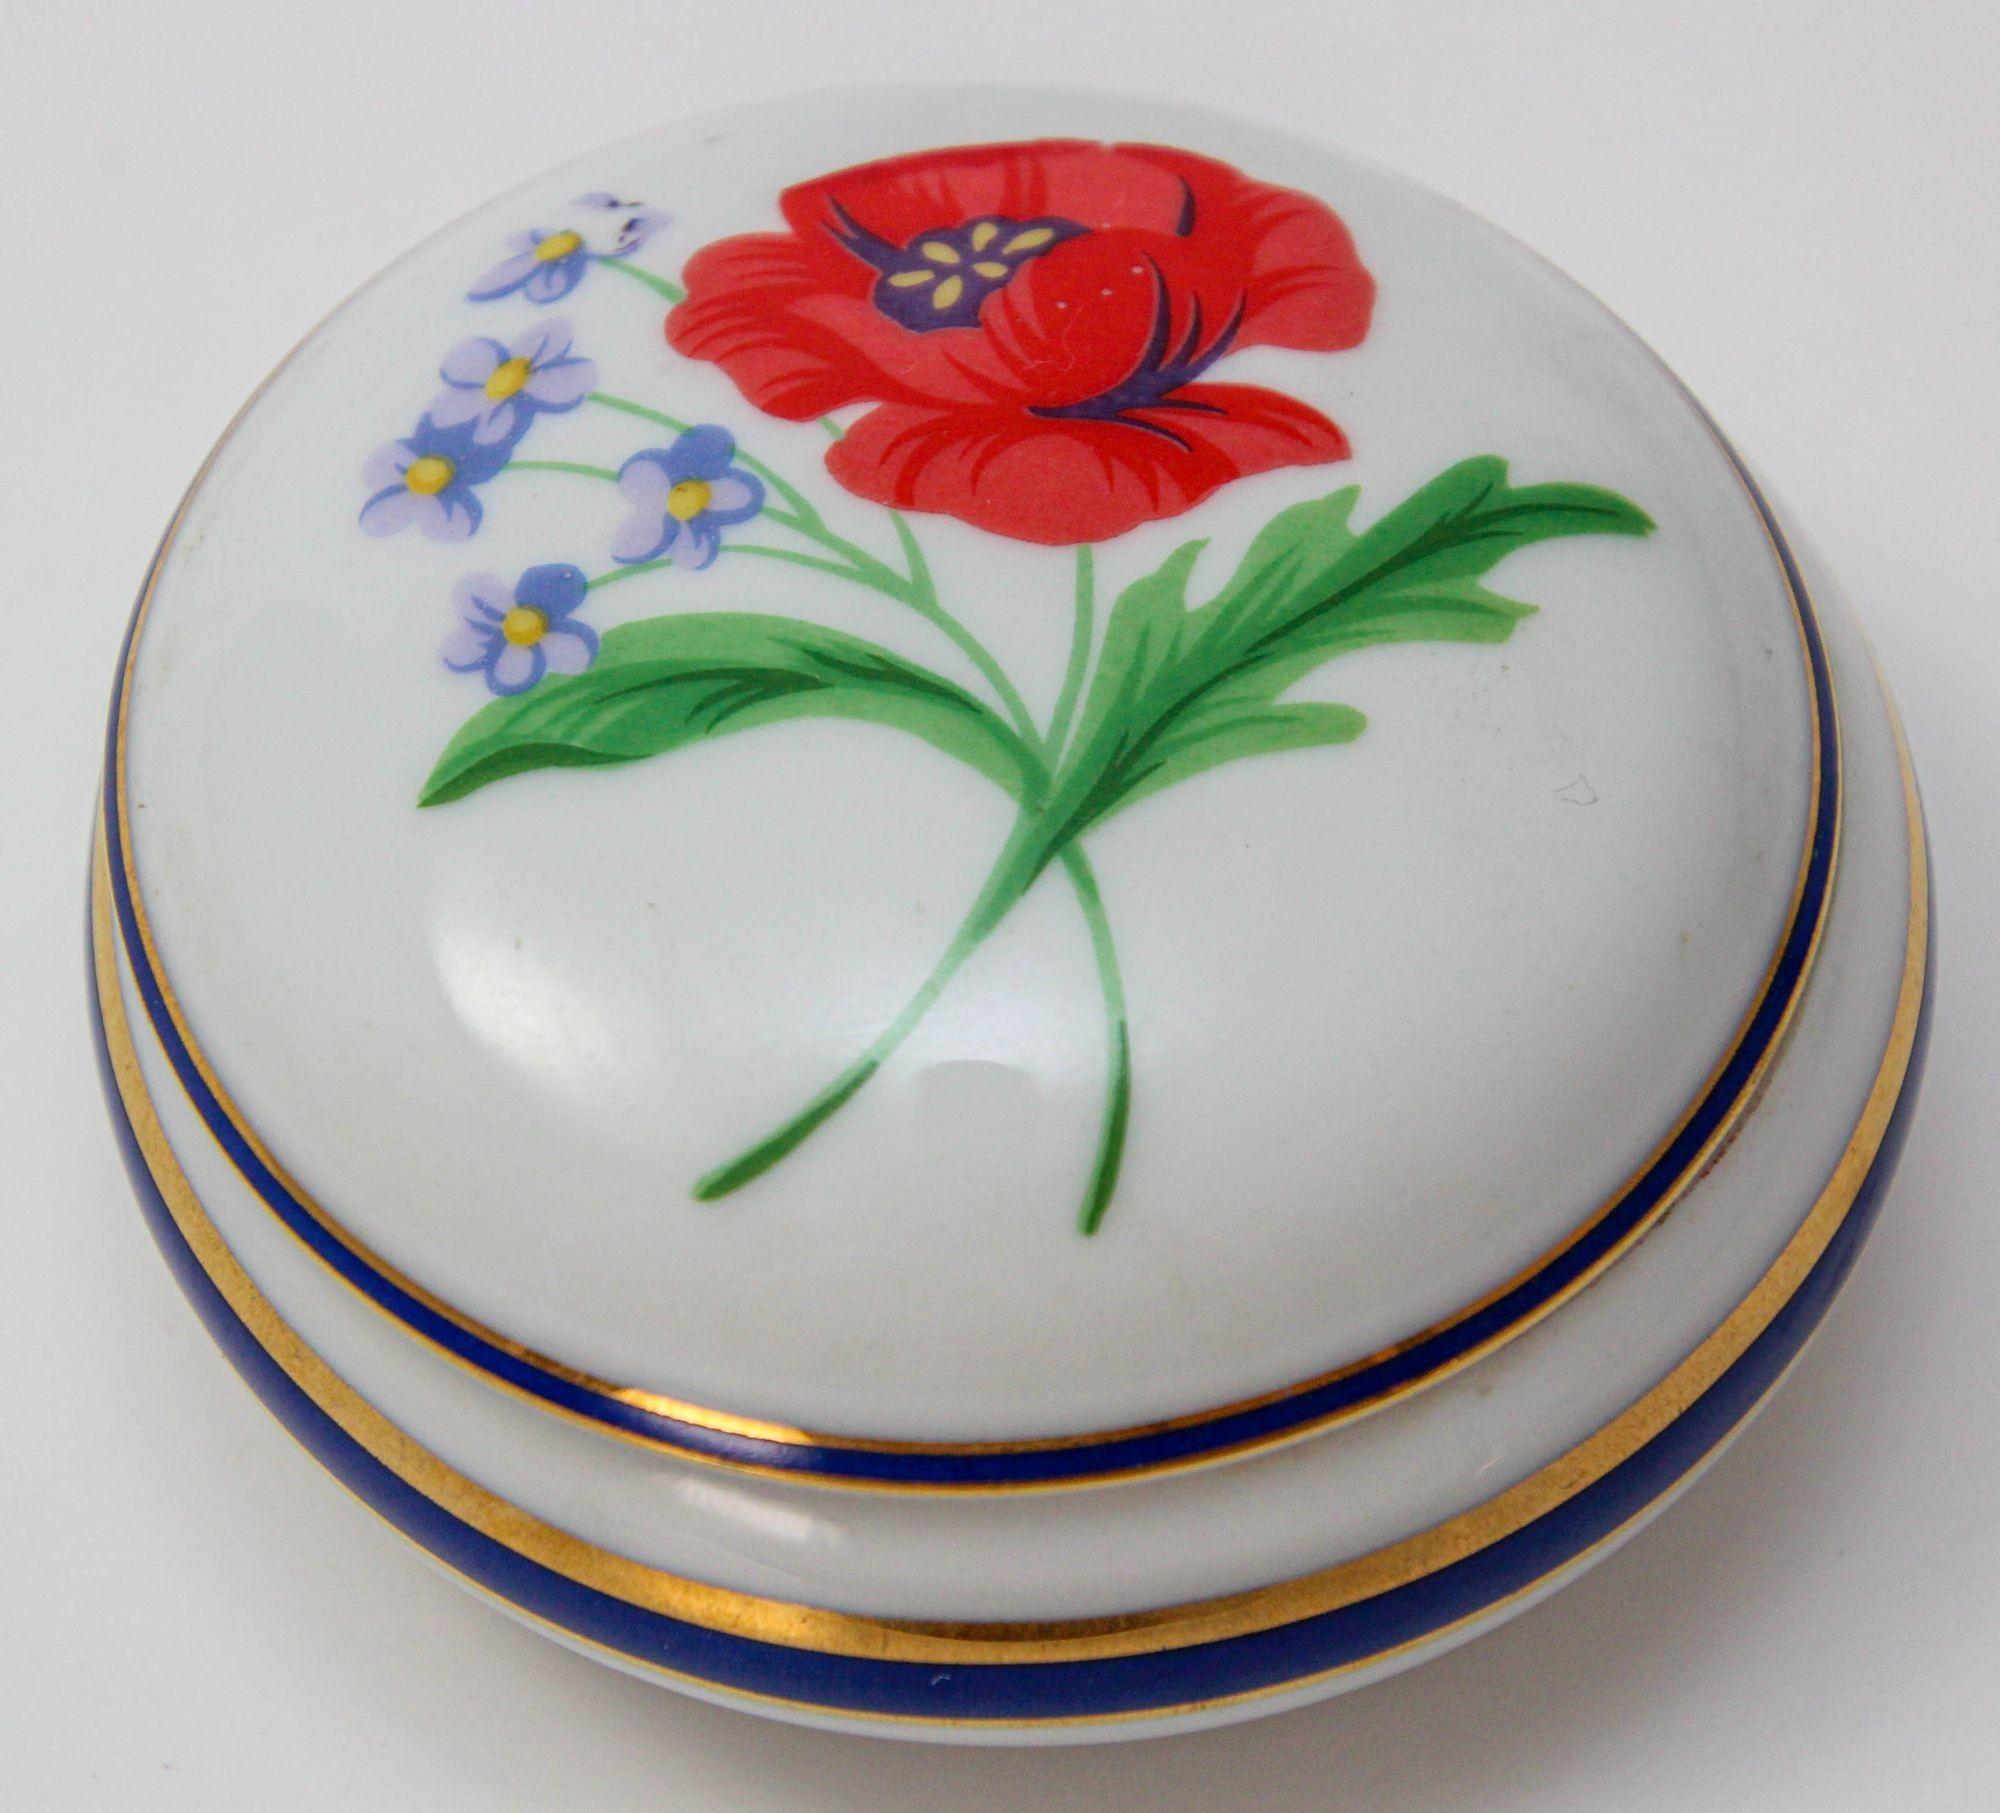 Tiffany & Co. Limoges France American Garden Round Porcelain Collectible Box For Sale 1